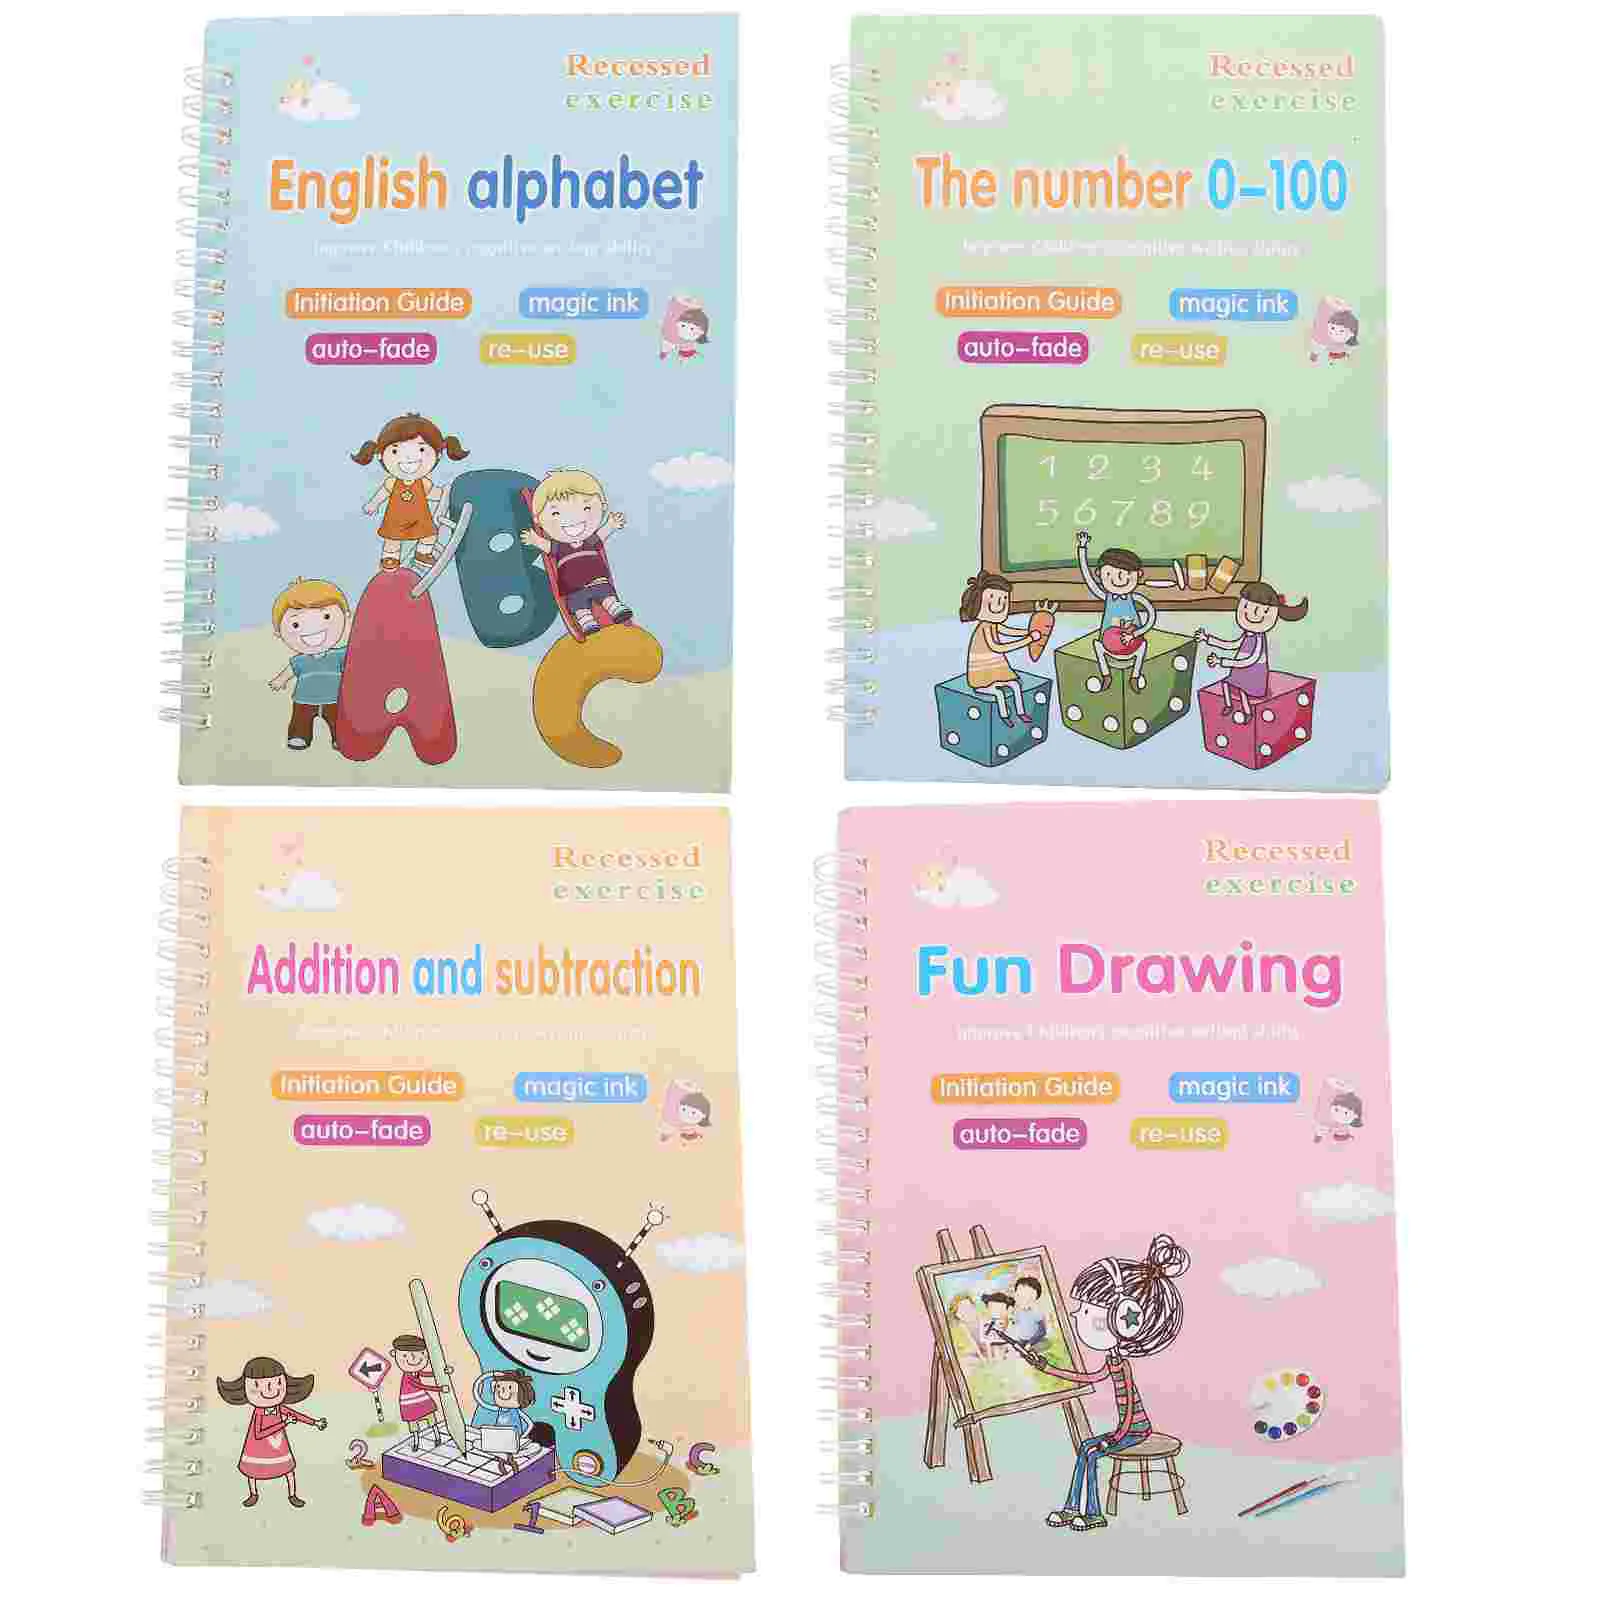 

Handwriting Book Copybook Practice Writing English Calligraphy Alphabet Books Learning Groove Workbook Copybooks Hand Lettering